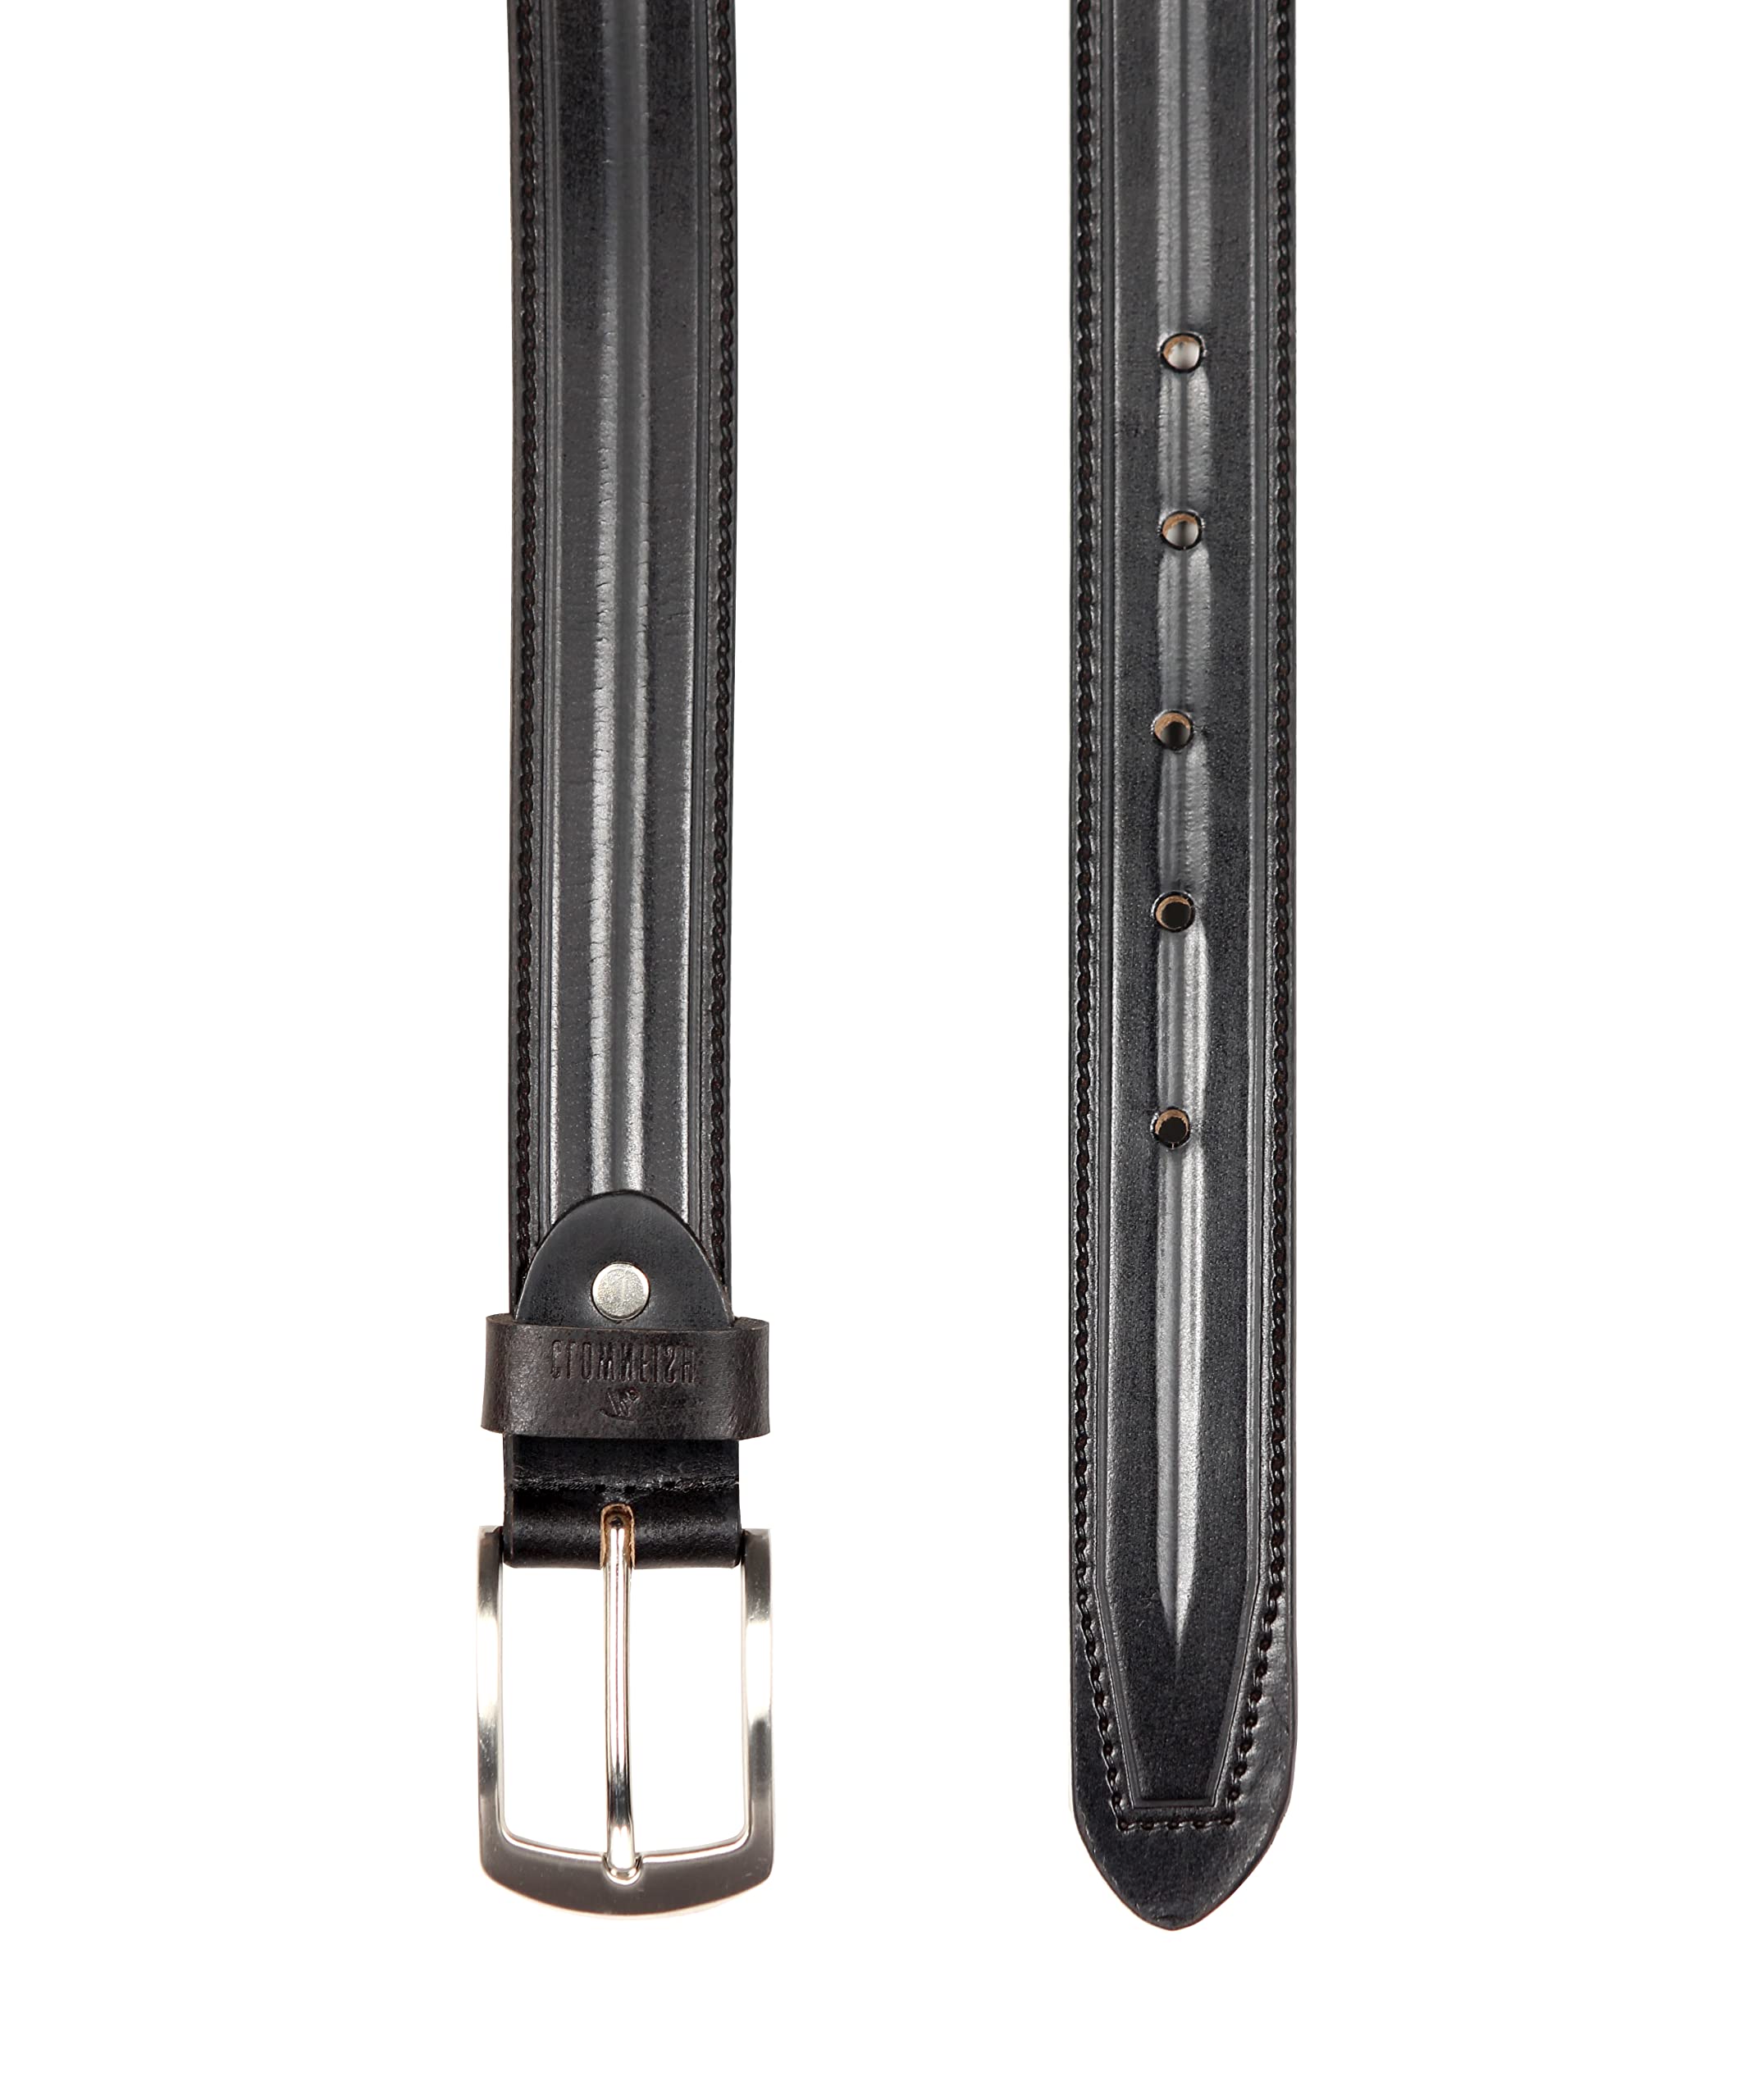 THE CLOWNFISH Men's Genuine Leather Belt with Textured/Embossed Design-Olive Black (Size-36 inches)